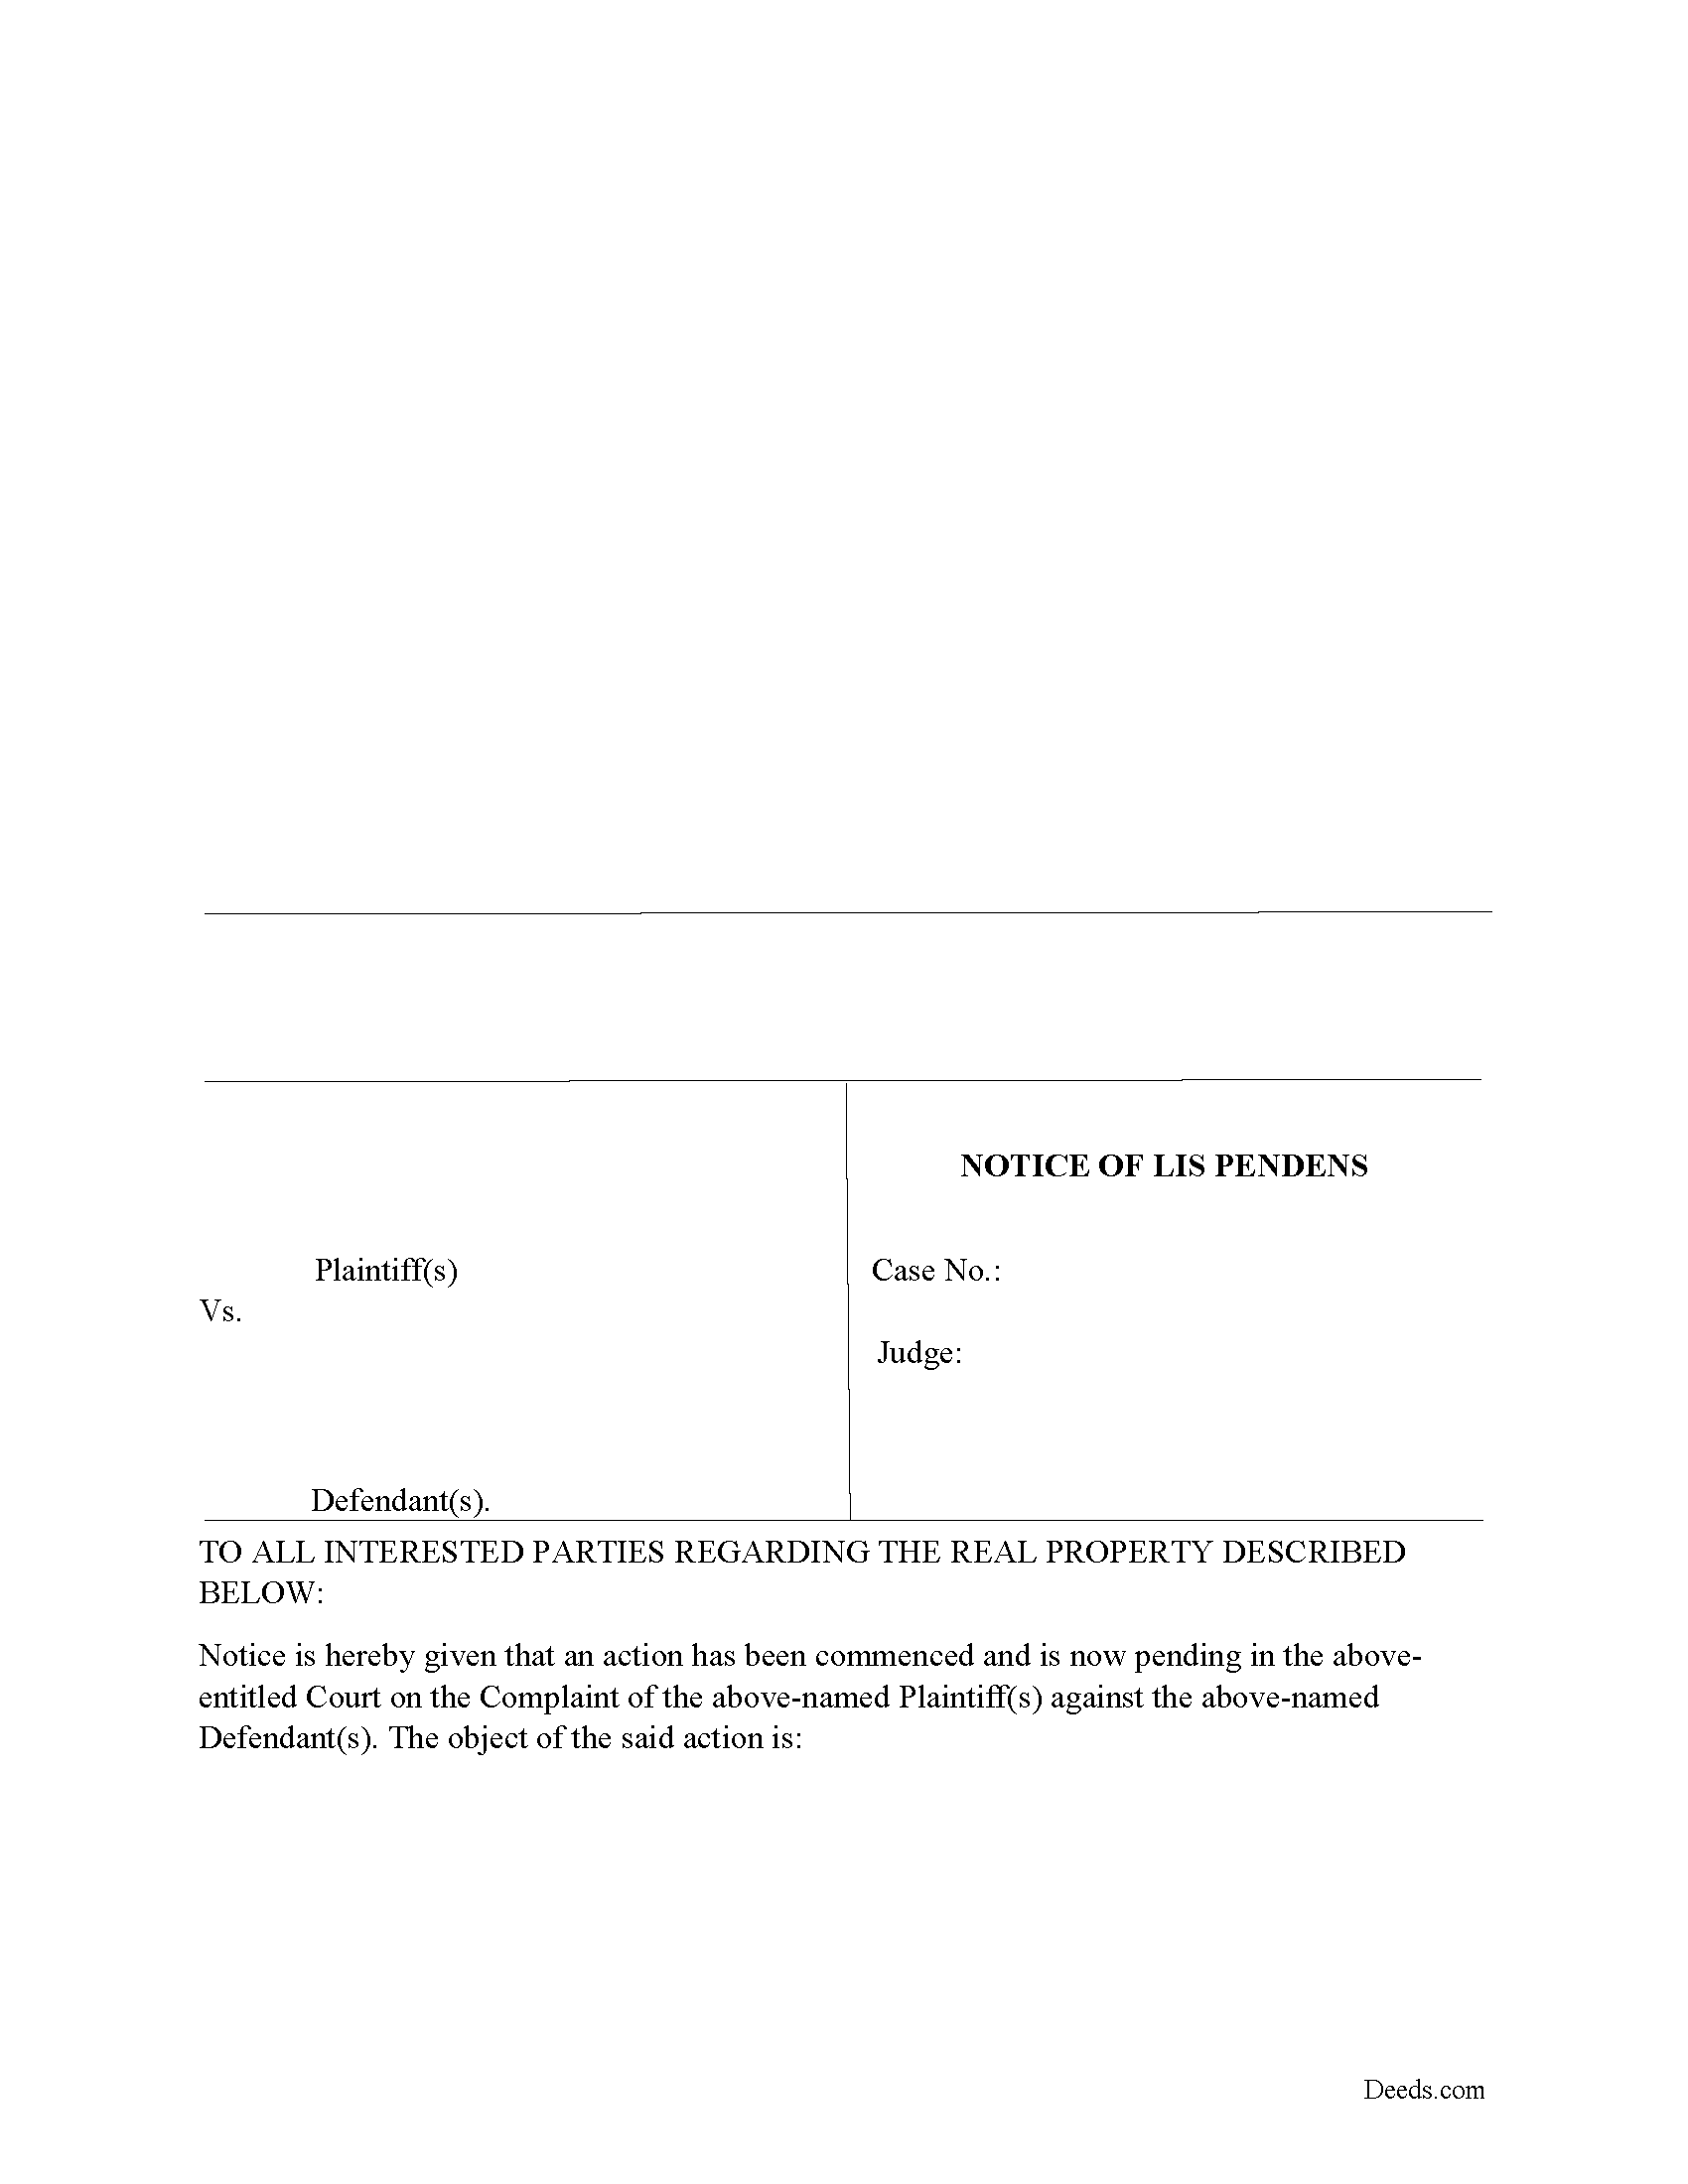 Release of Notice of Lis Pendens Form